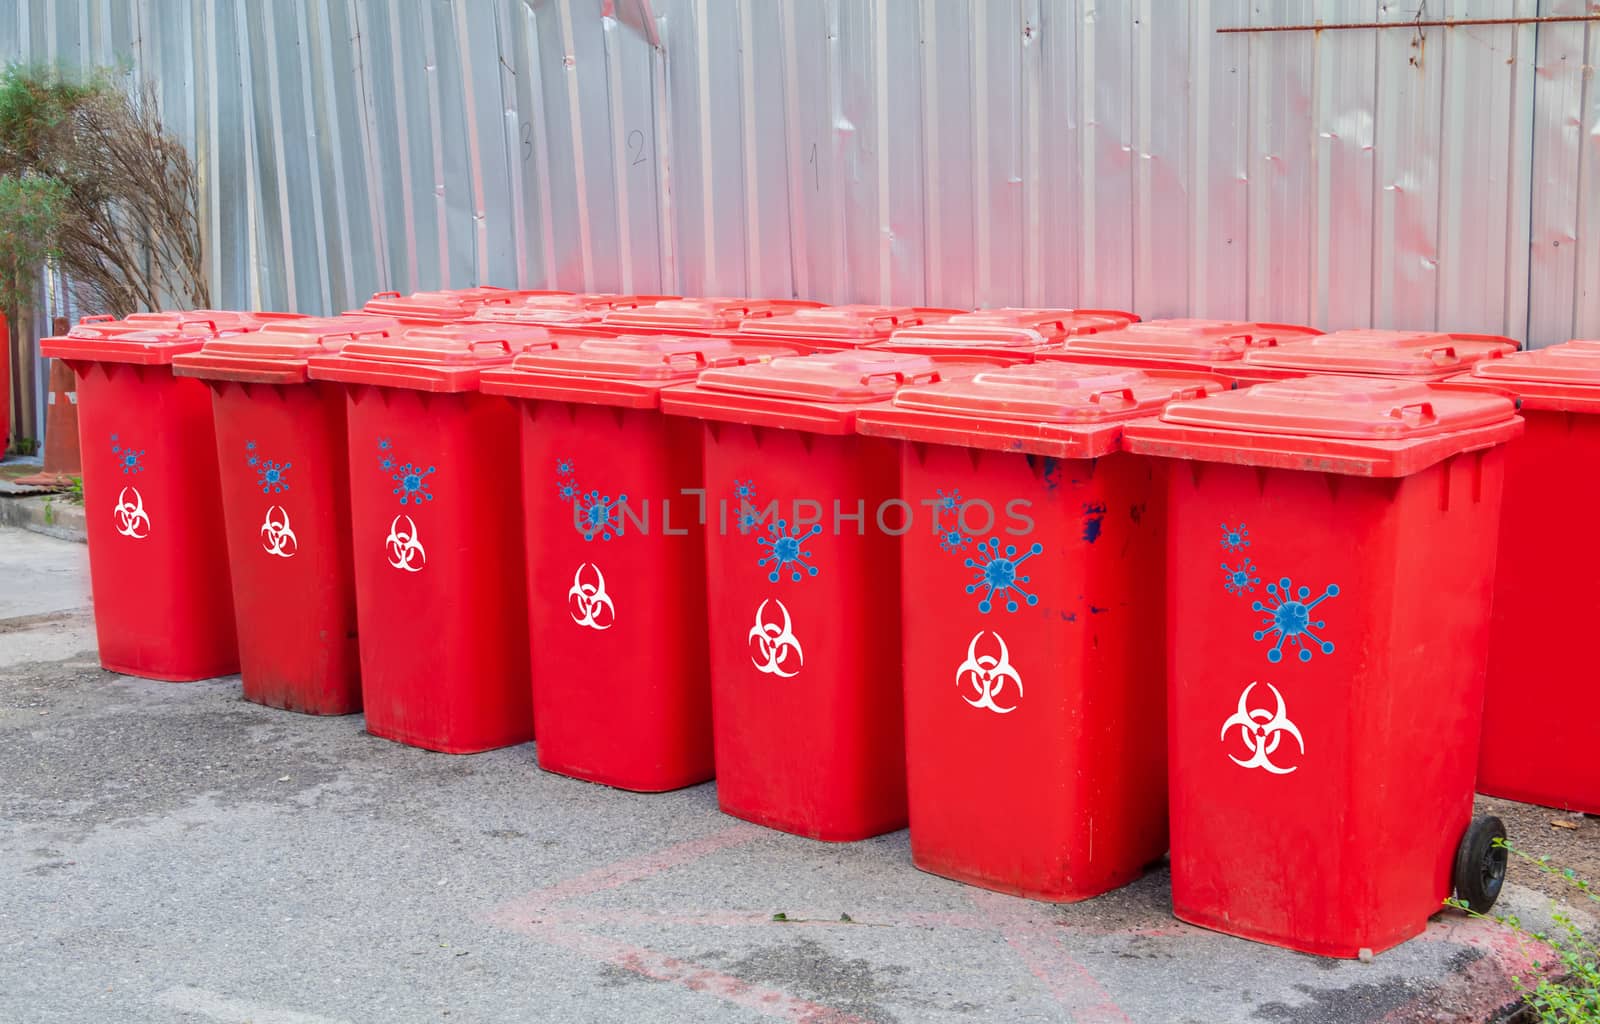 red bins group with symbol infectious in the outdoors keep clean from germs virus. concept prevent garbage infection coronavirus (covid-19)